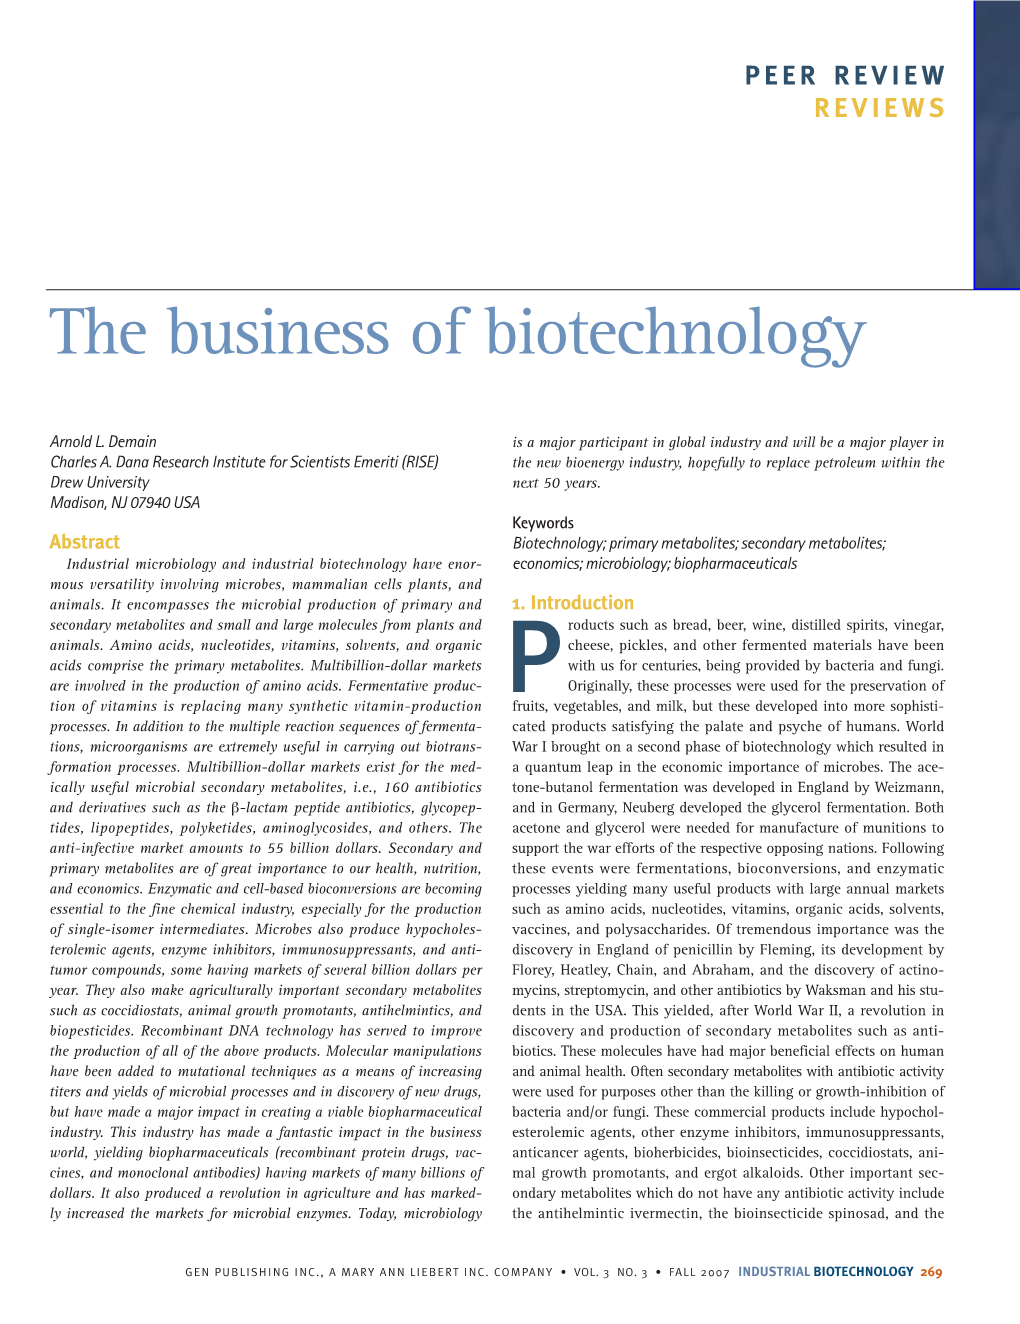 REVIEWS: the Business of Biotechnology